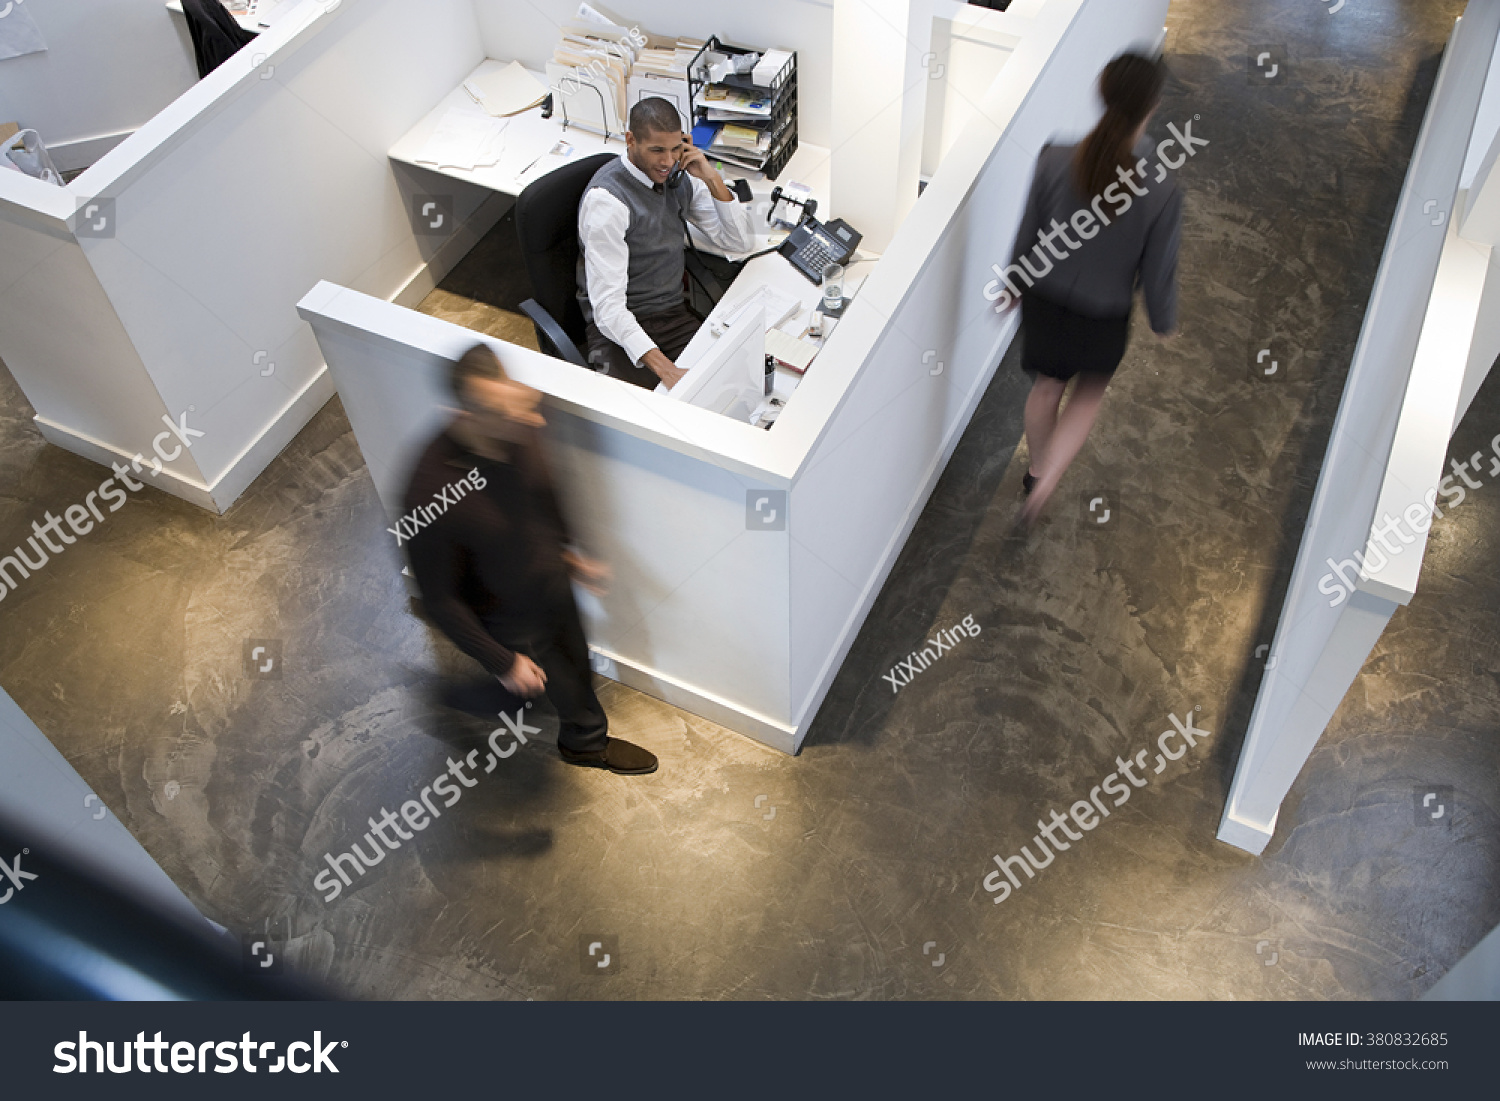 People in an office #380832685